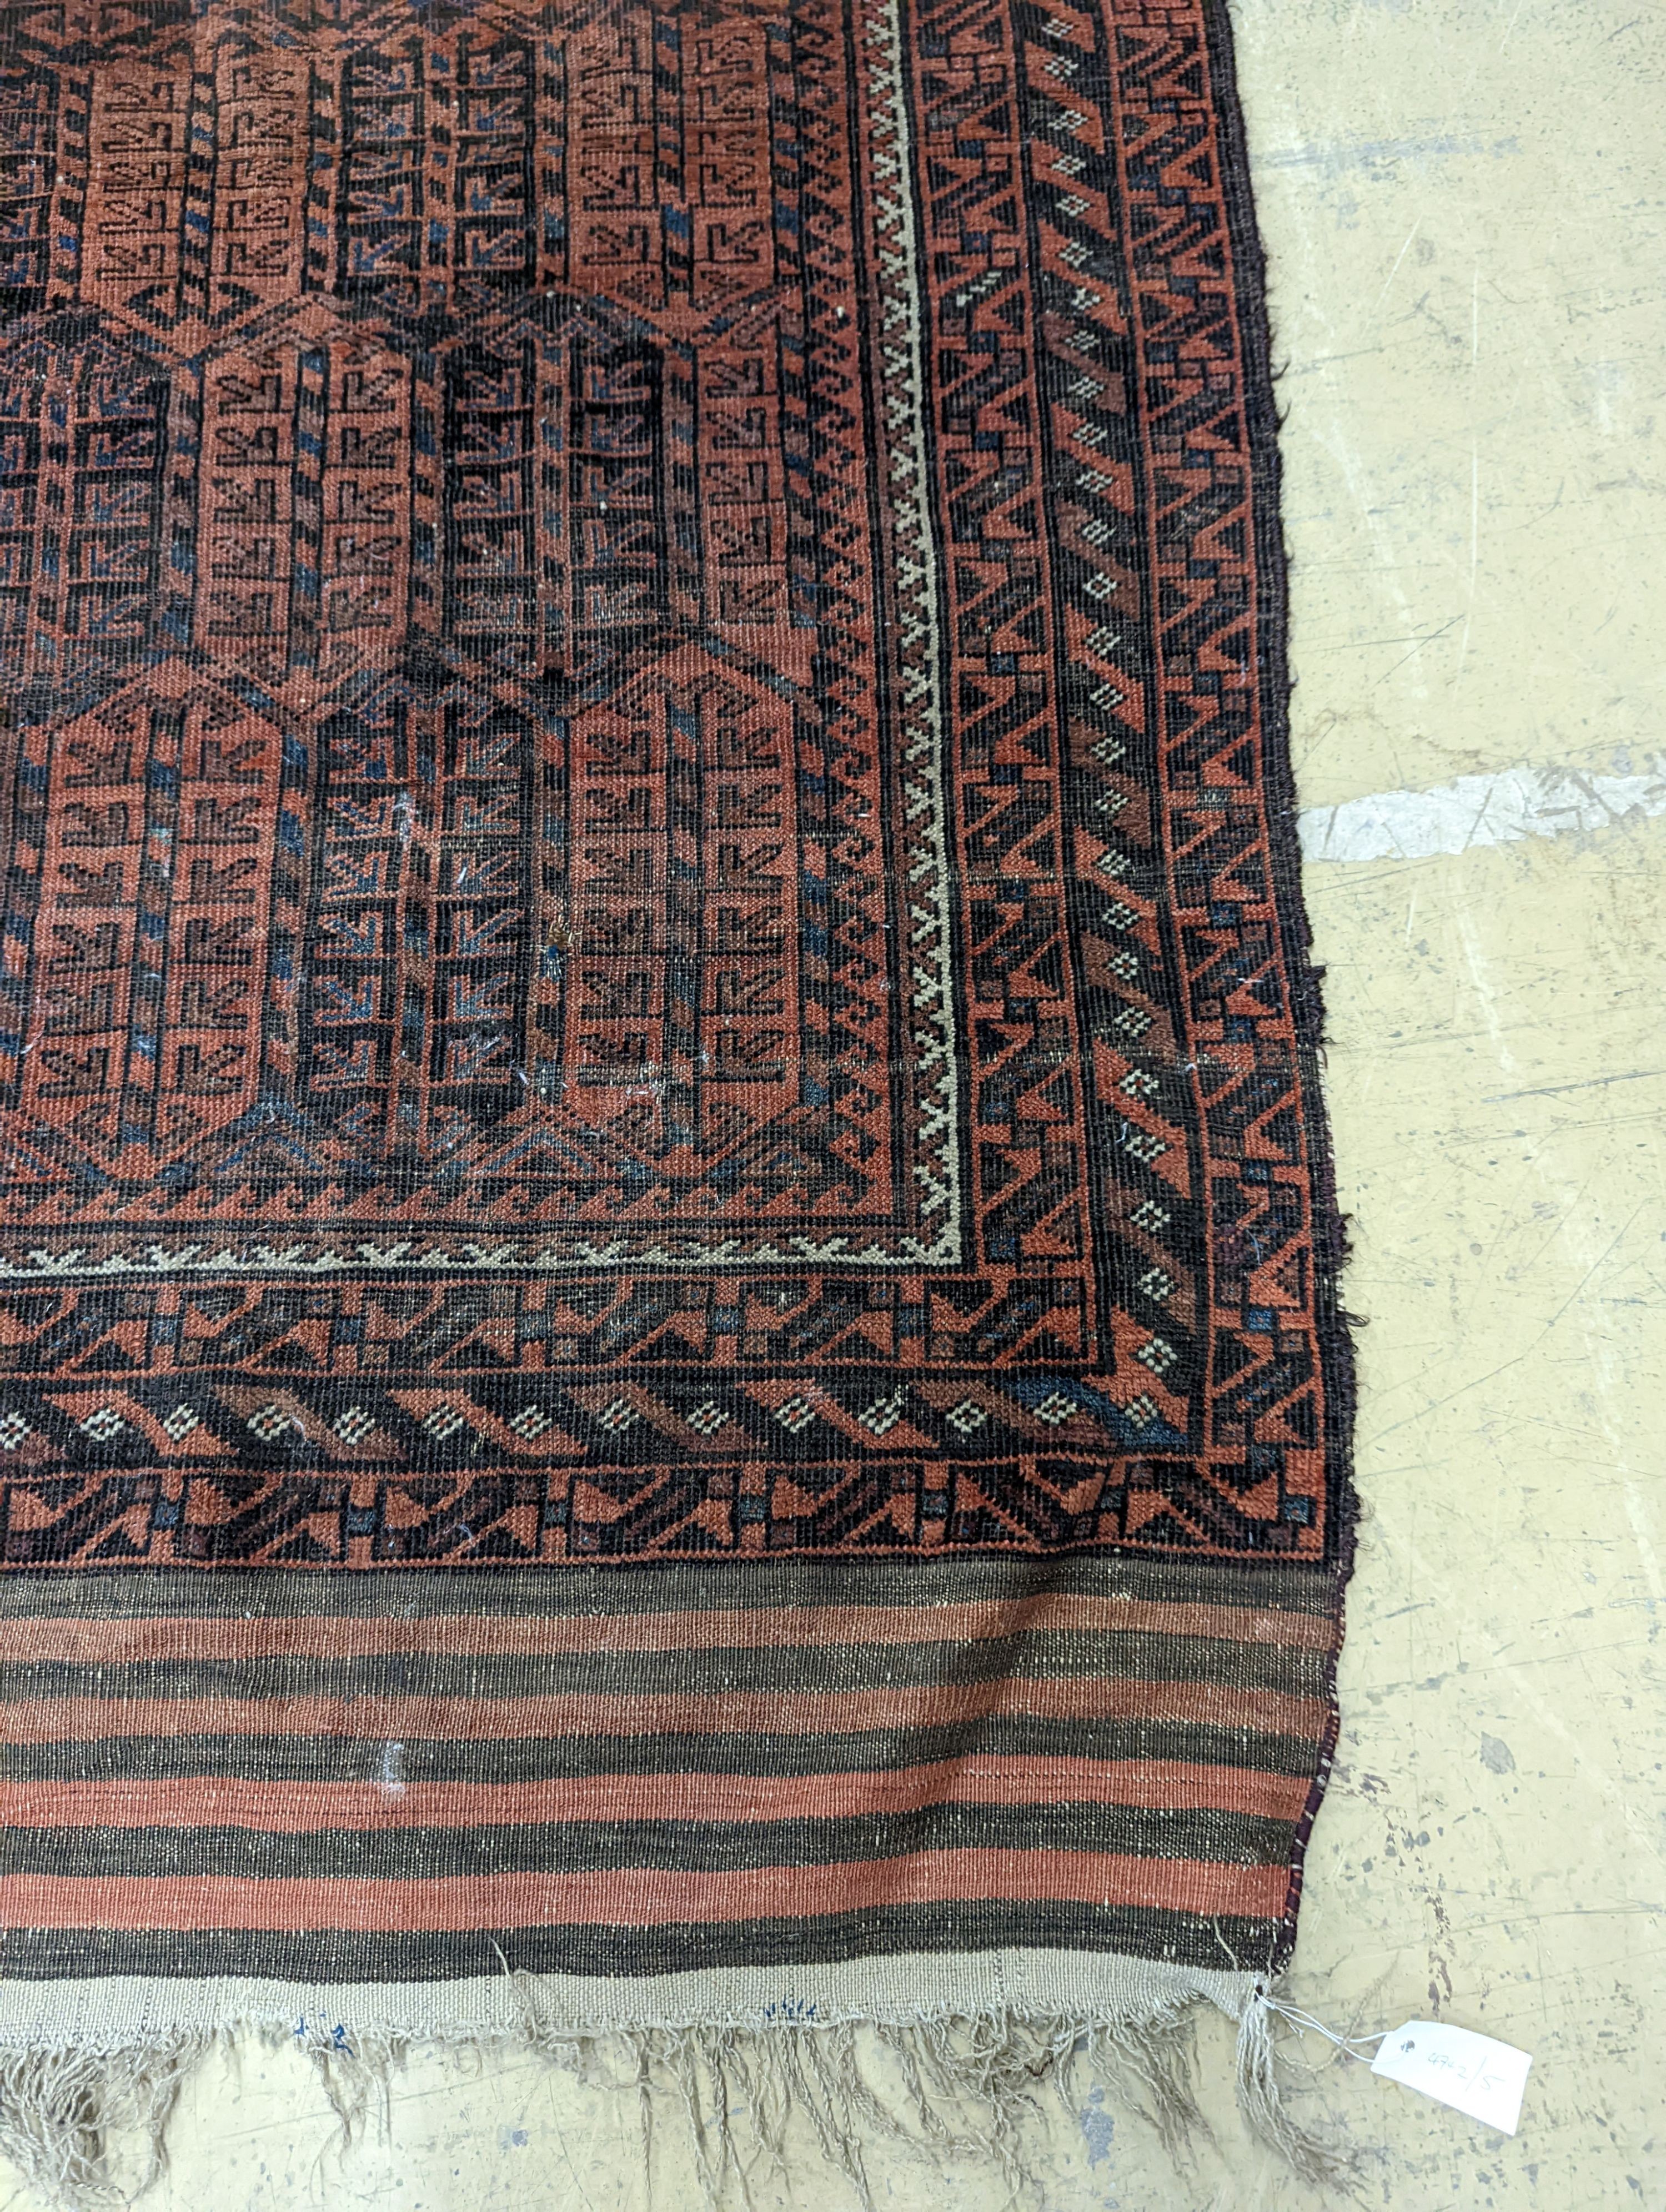 A Belouch red ground rug and a prayer rug, largest 178 x 106cm